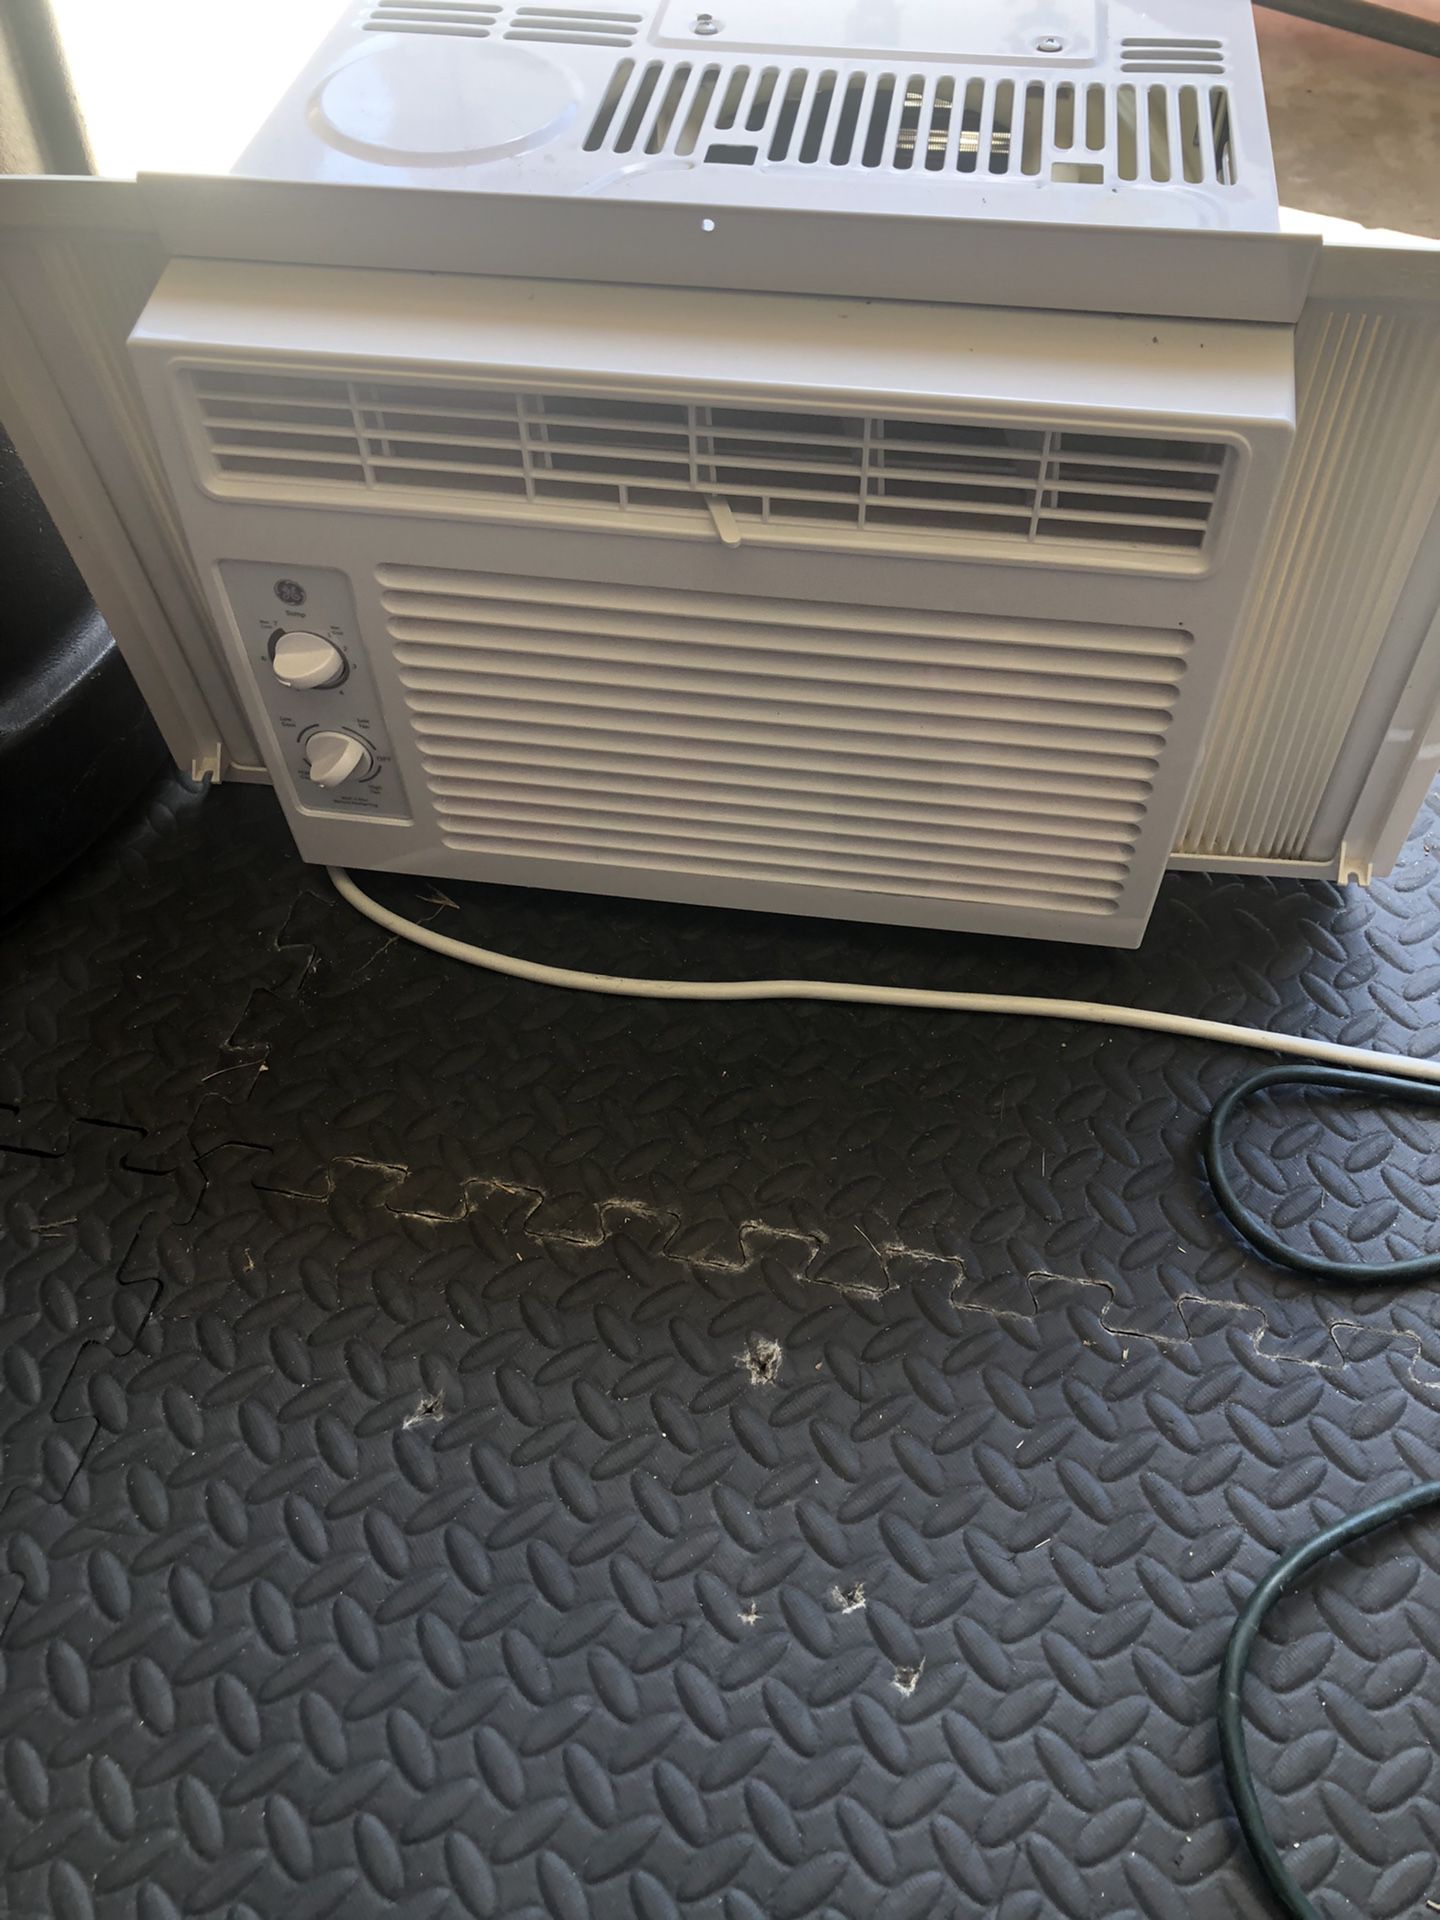 Small GE window air conditioner 